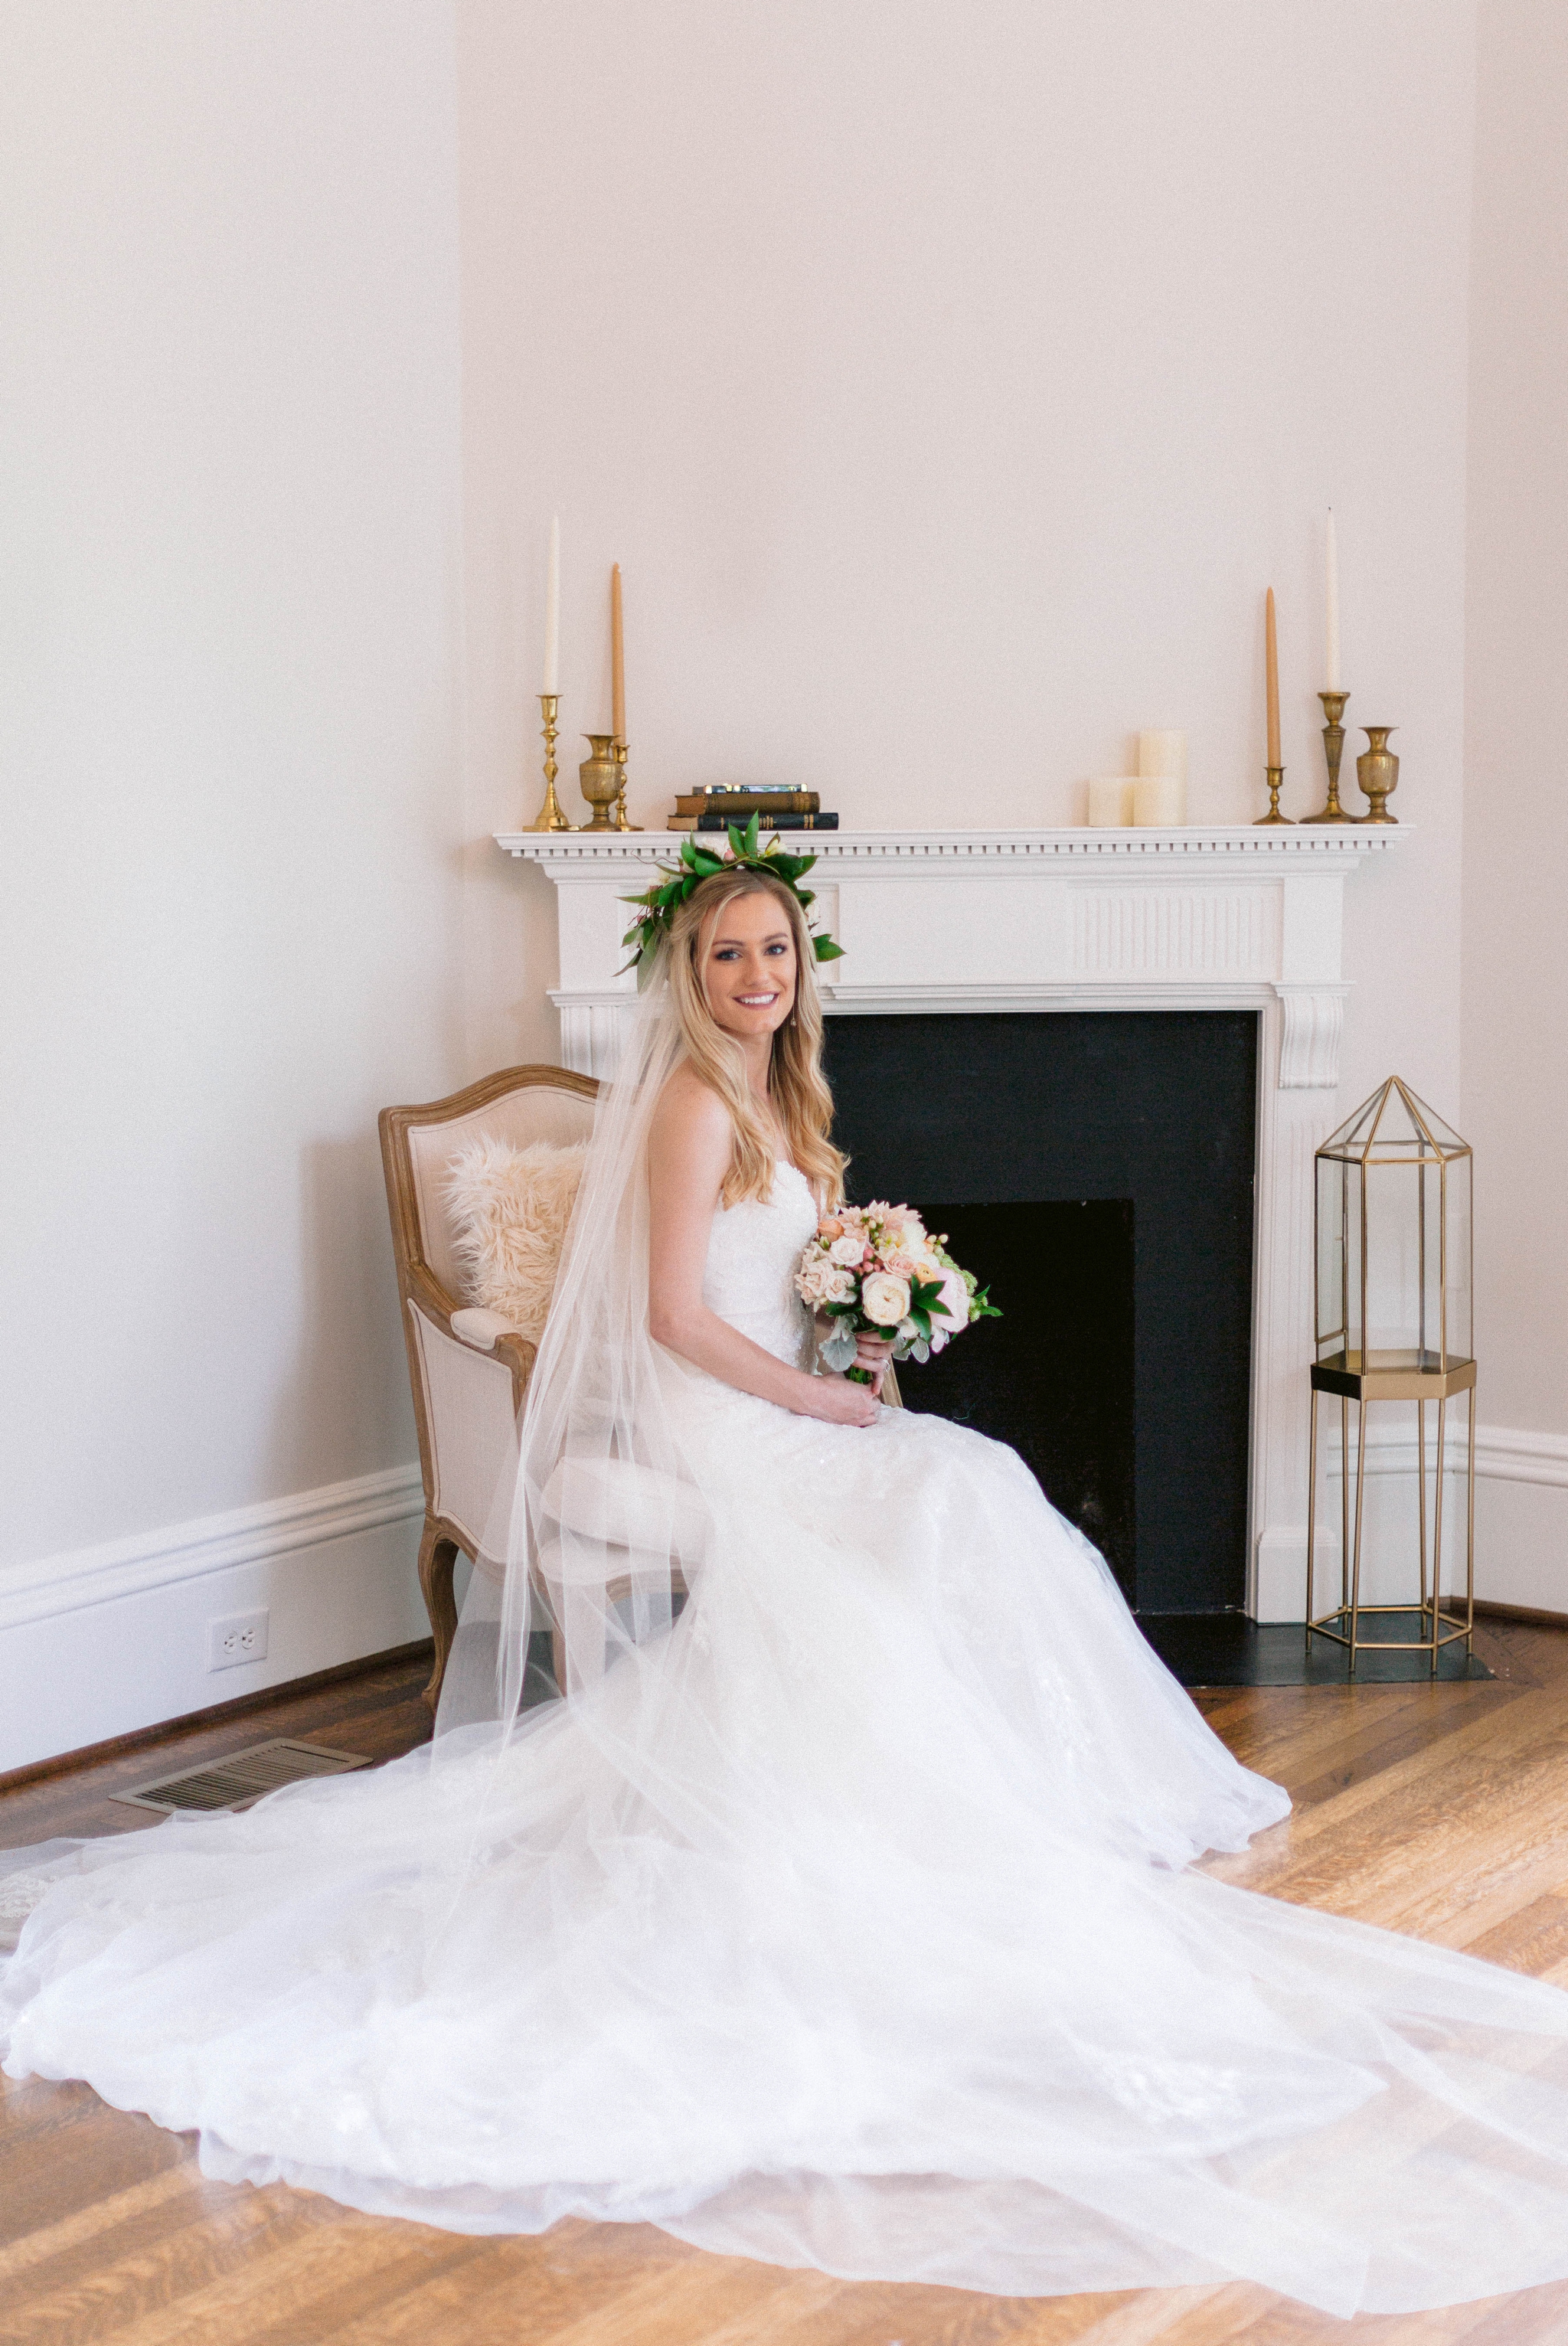  Indoor Bridal Portraits in an all white room at a luxury estate with natural light before the ceremony - Bride is wearing a Hawaiian Flower Crown and a cathedral veil in a Wedding Gown by Stella York sitting on an antique vintage chair in front of a